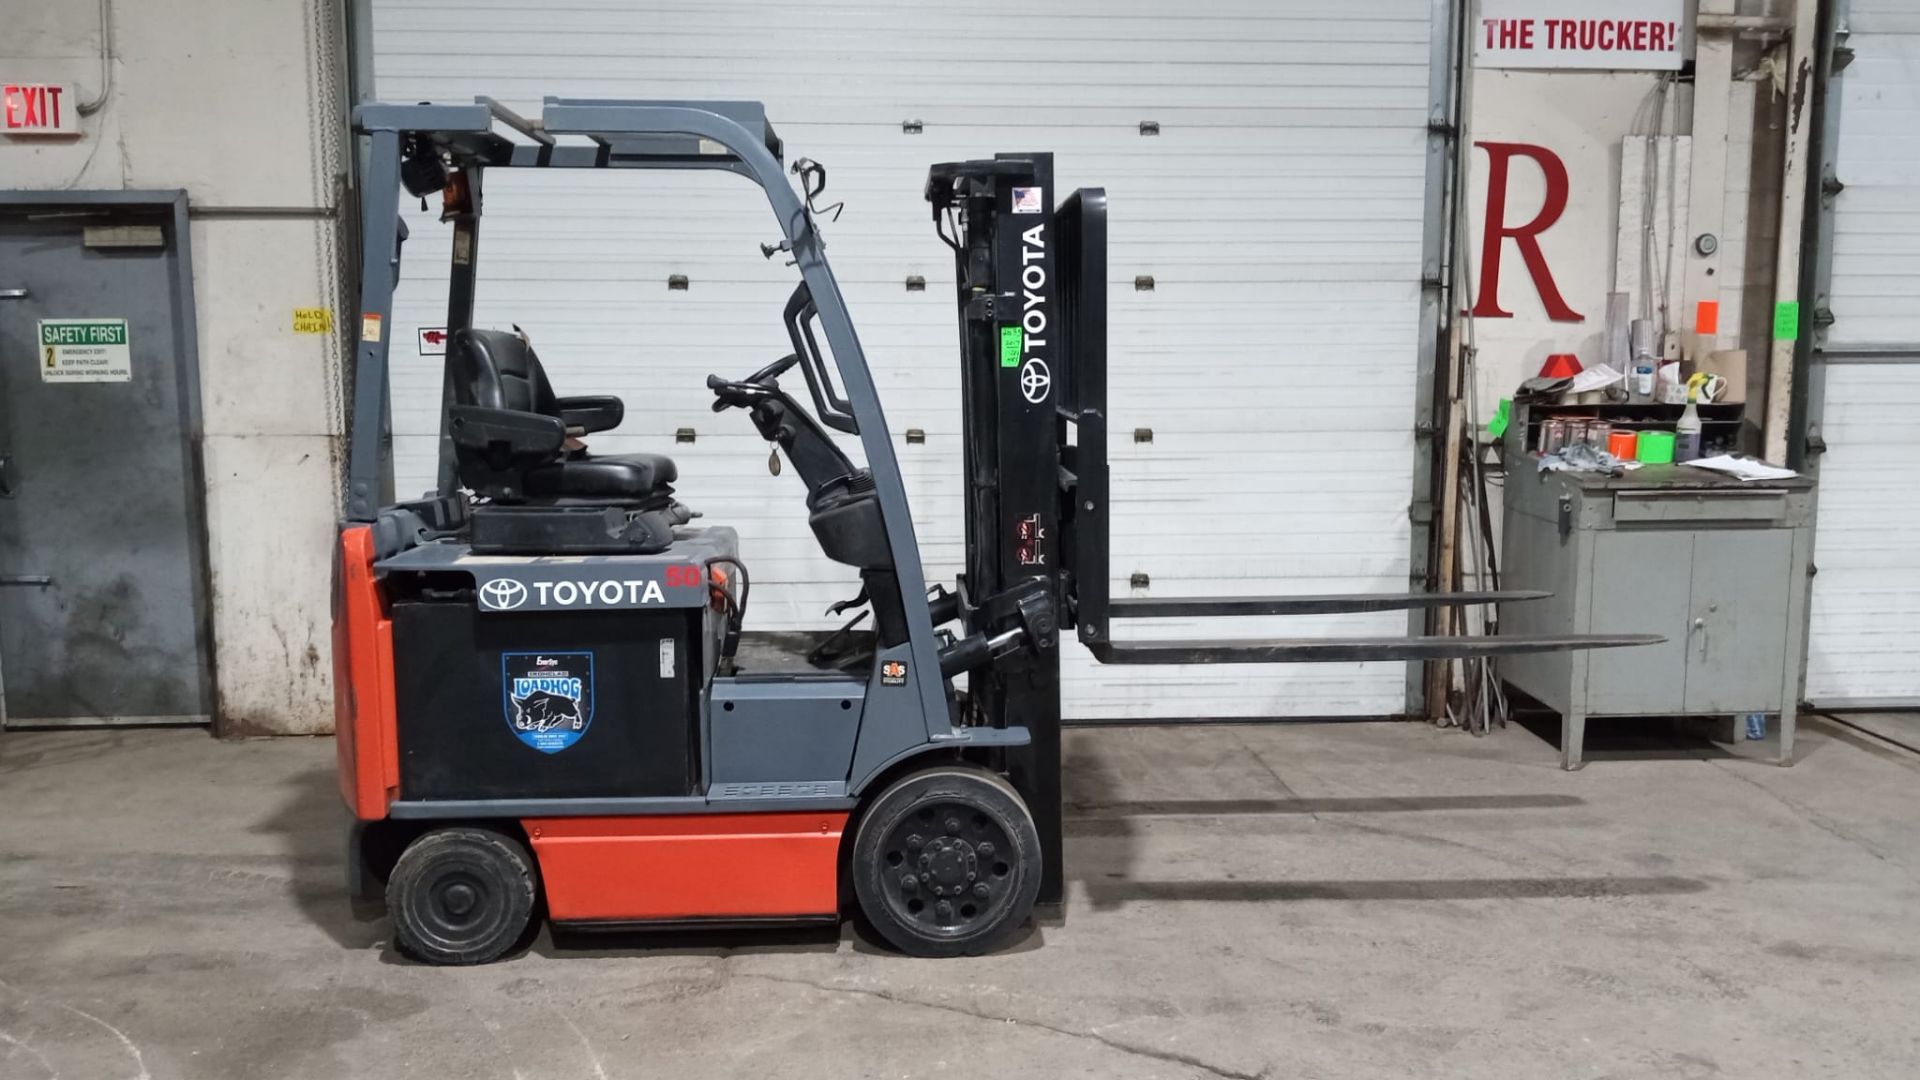 ***2017 TOYOTA 5,000lbs Capacity Electric Forklift 36V with sideshift and 60" forks - FREE CUSTOMS